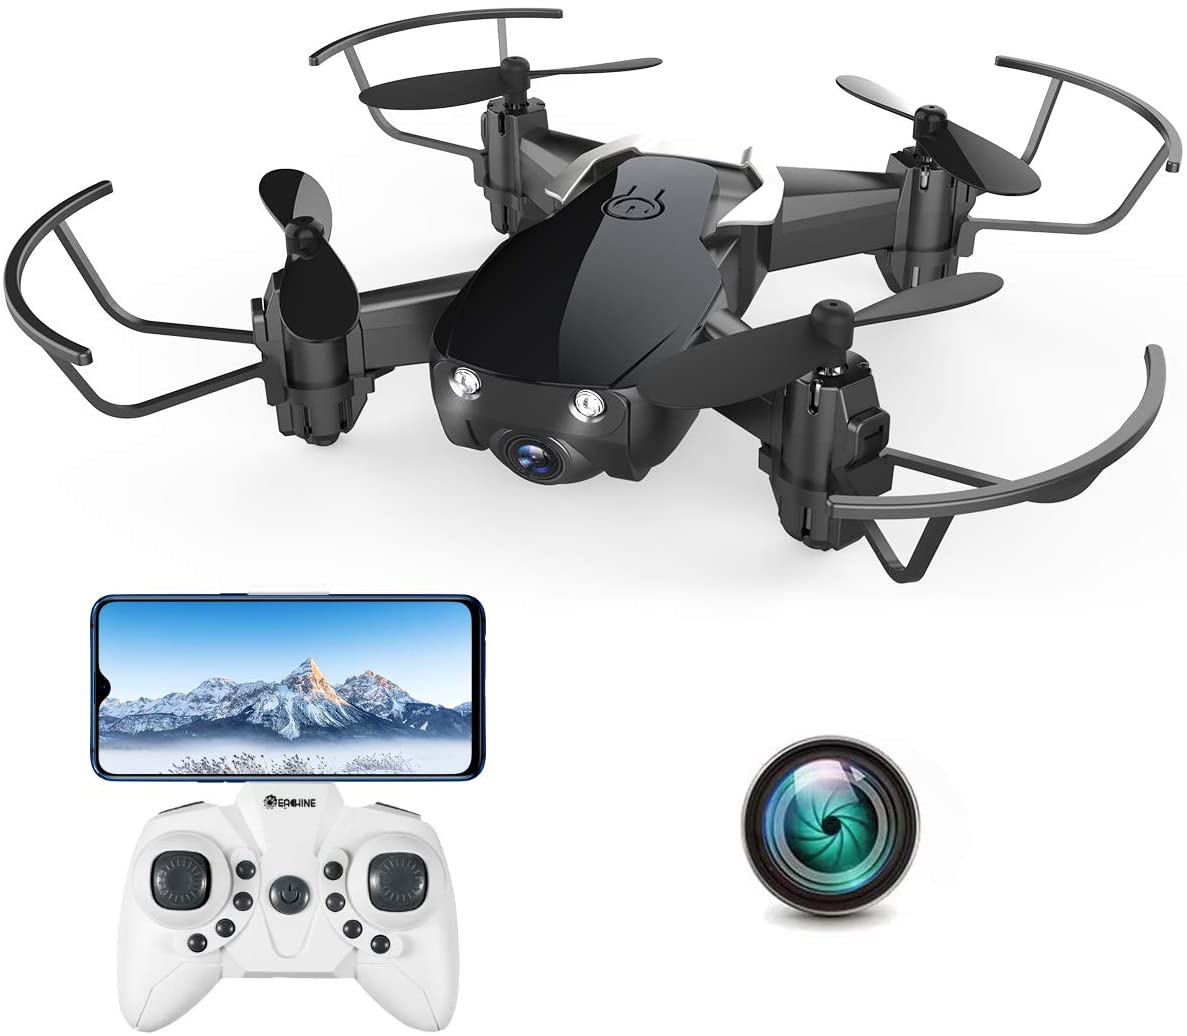 Mini Drone with 720P Camera for Kids and Adults, EACHINE E61HW WiFi FPV Quadcopter with 720P HD Camera Selfie Pocket Nano Drone for Beginner - Auto Hover Mode, One Key Take Off/Landing, APP Control